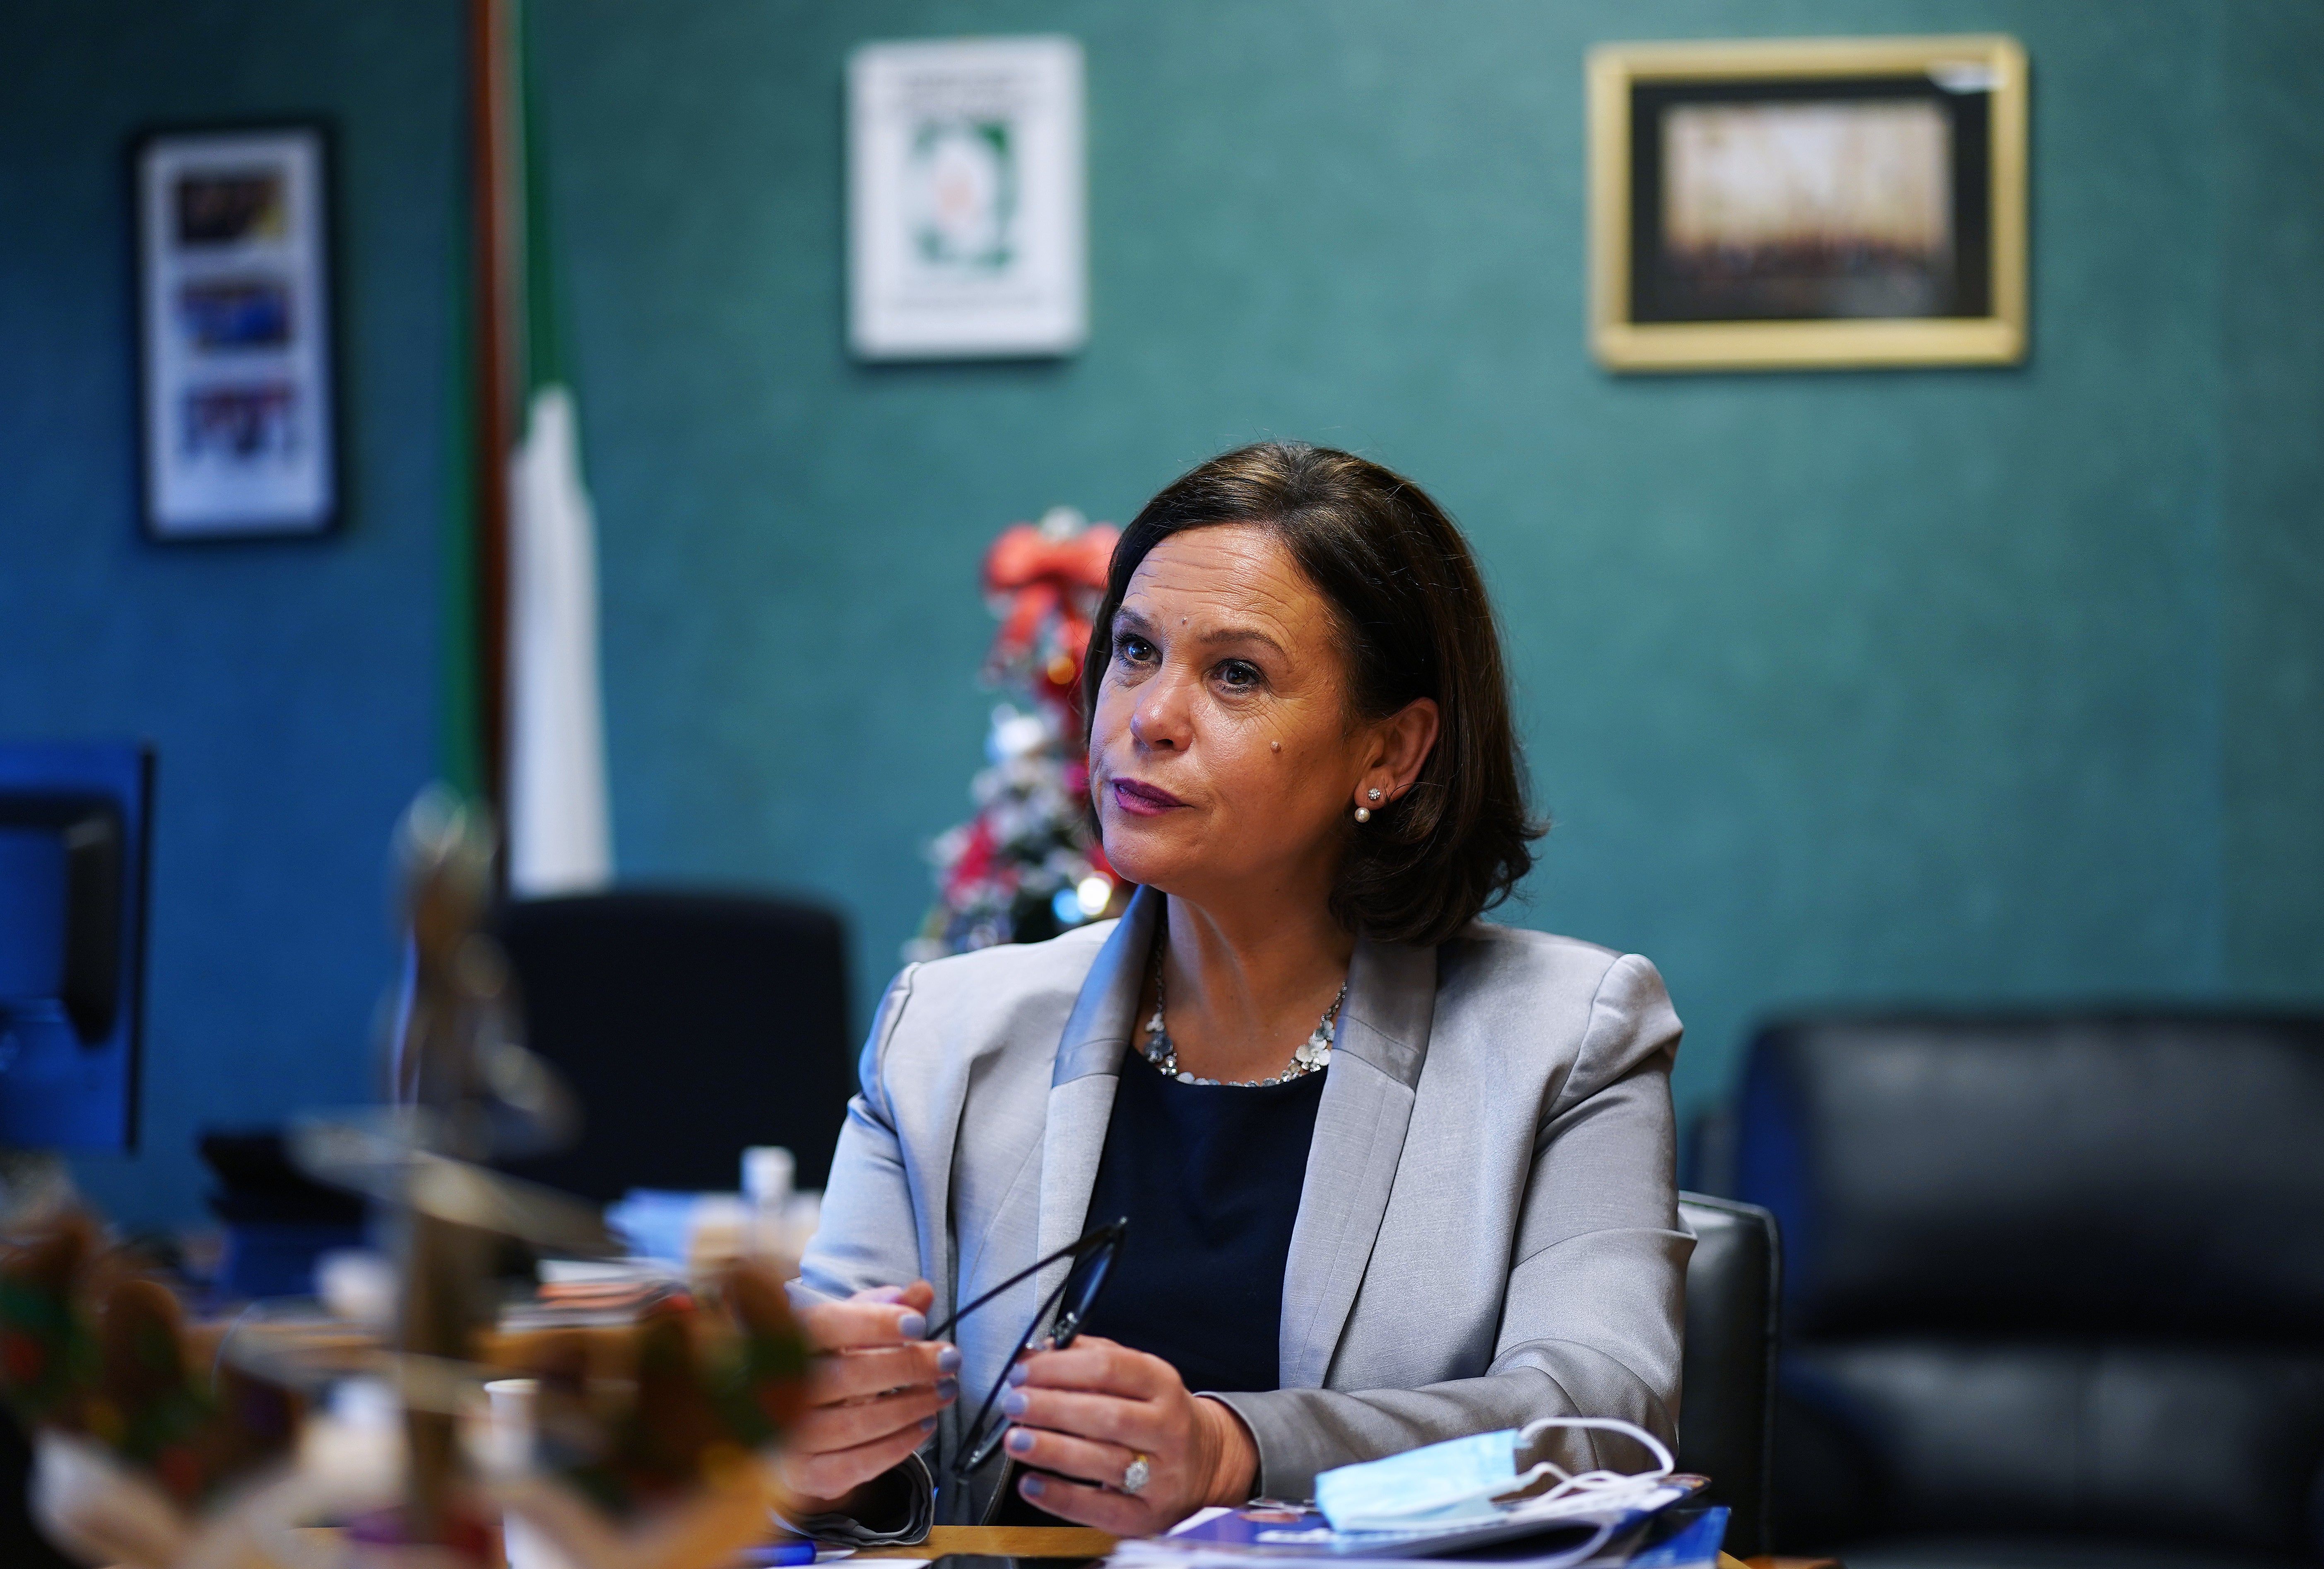 Sinn Fein leader Mary Lou McDonald has said she will not call on Gerry Adams to apologise (Brian Lawless/PA)